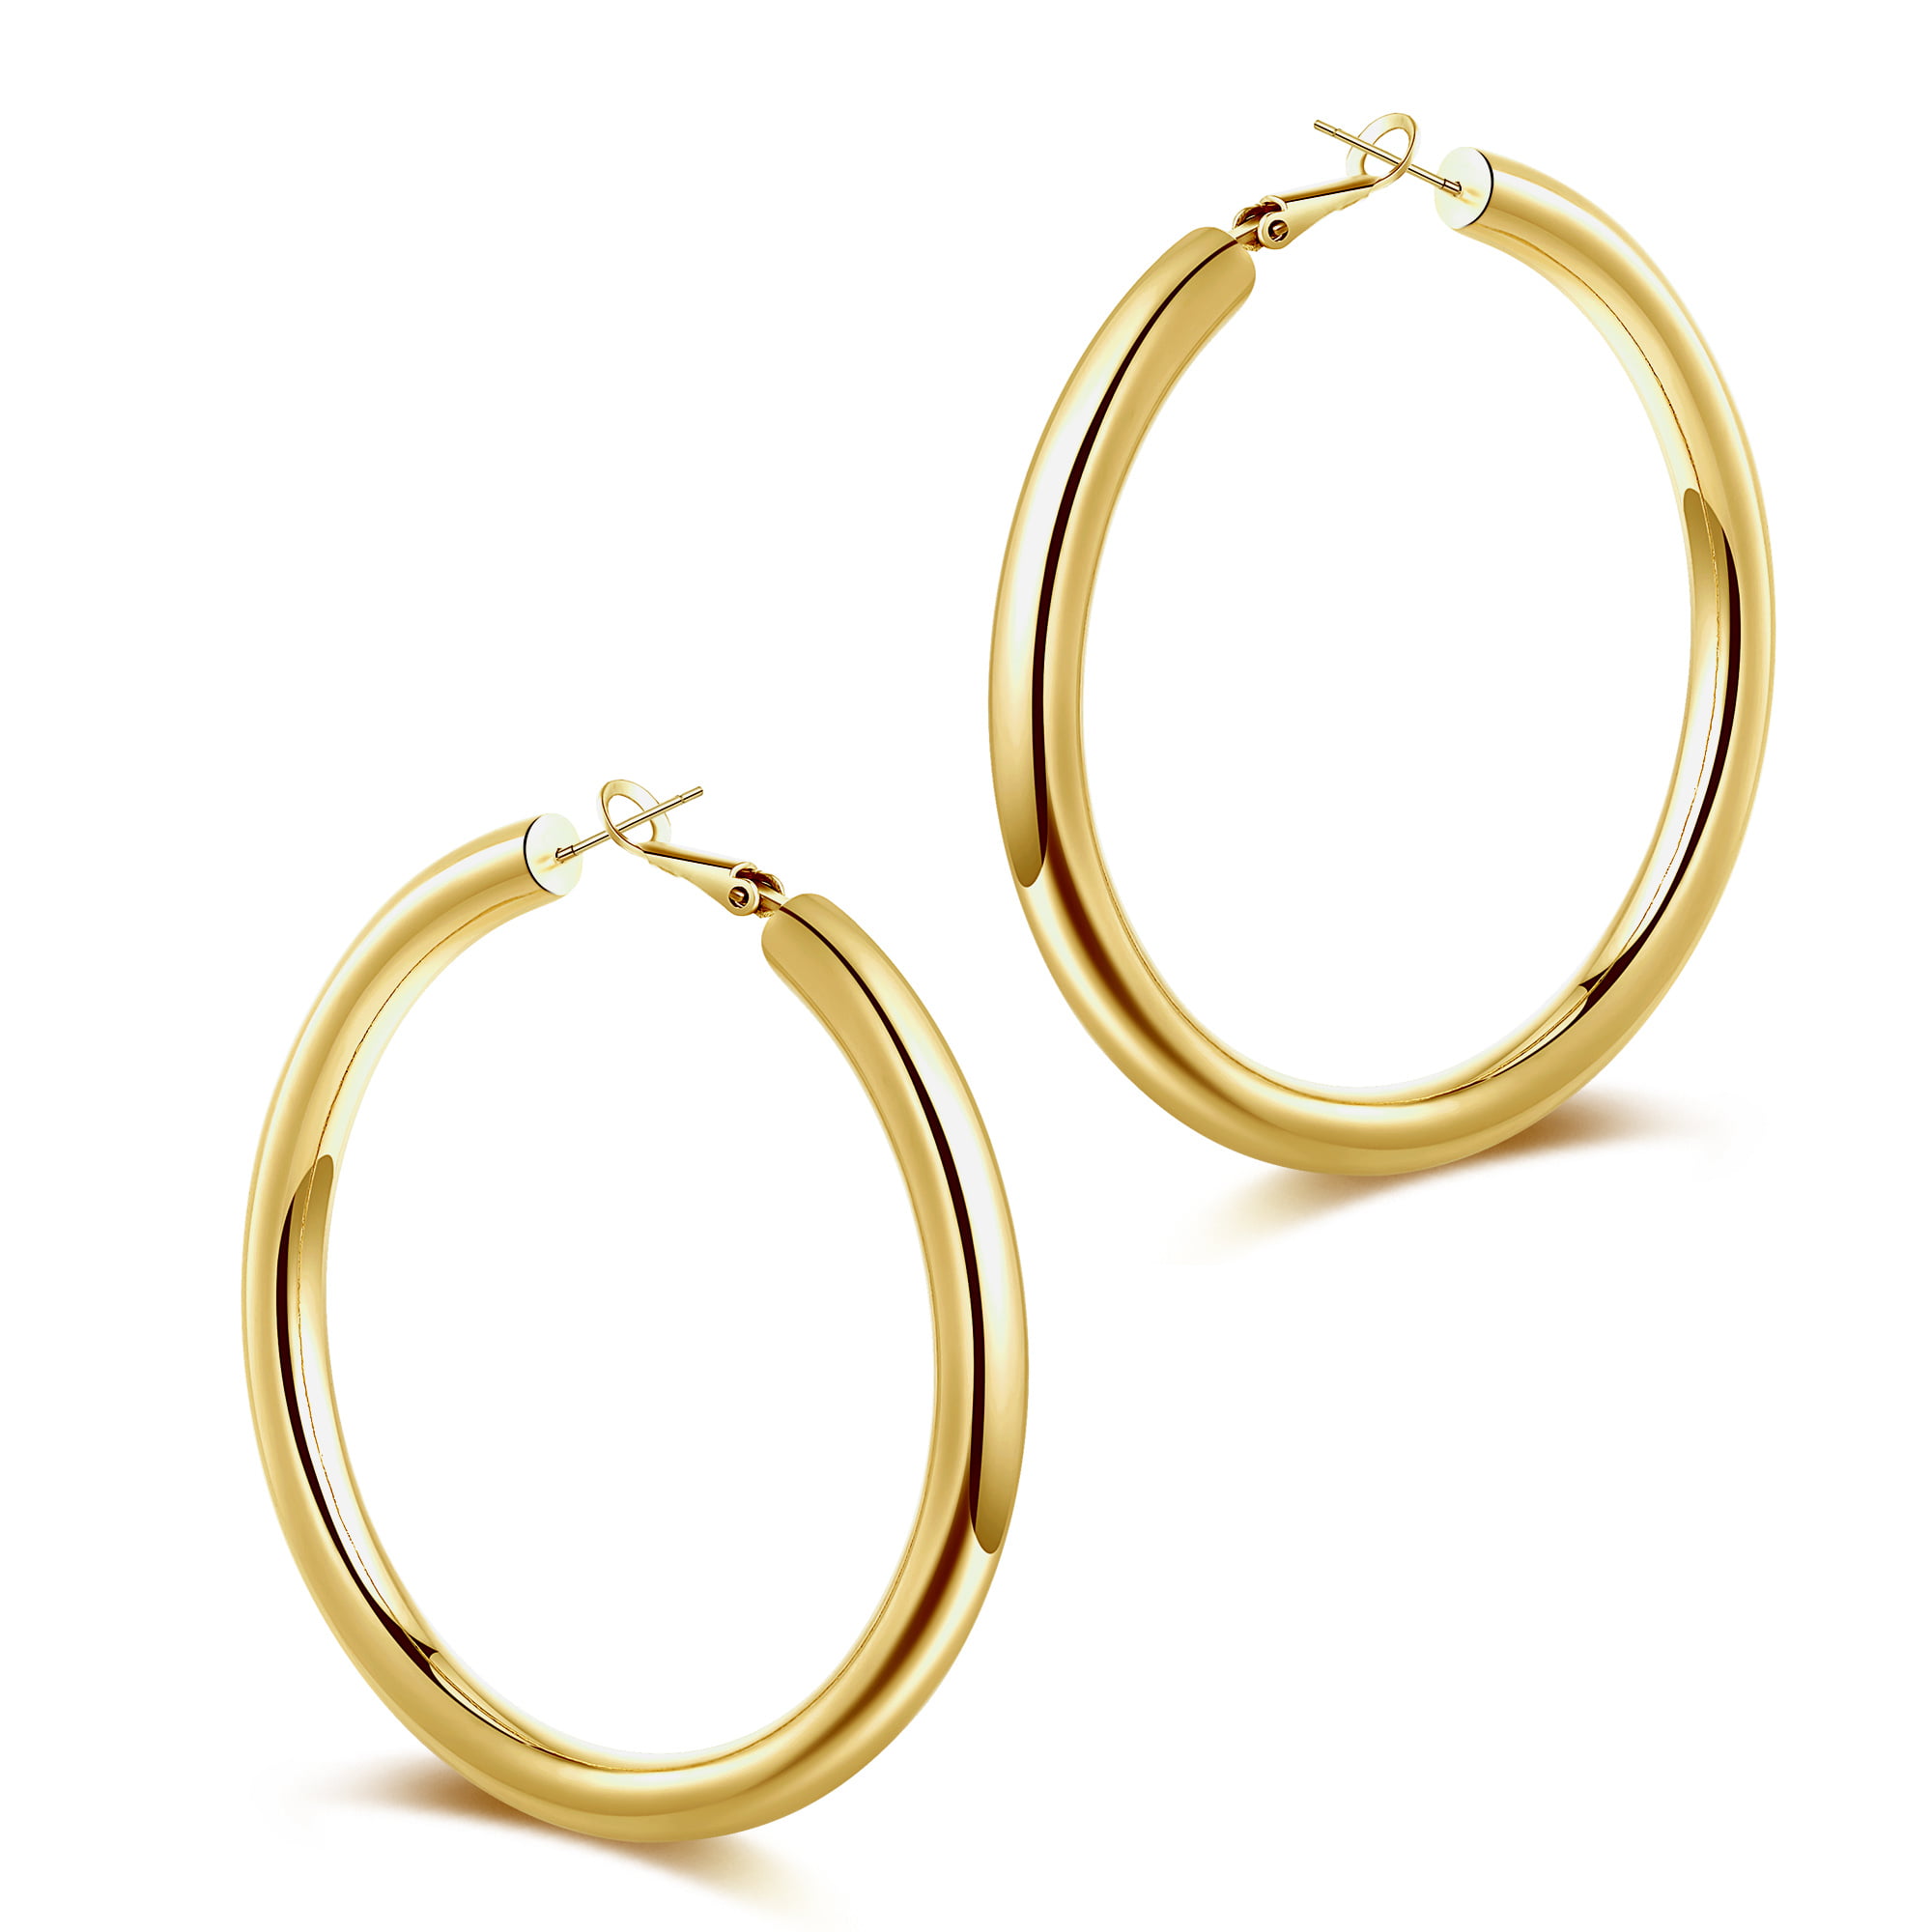 Hoop Earrings 18K Thick Gold Hoops Large Chunky Circle Earring for Women Girl with Sterling Silver Post 